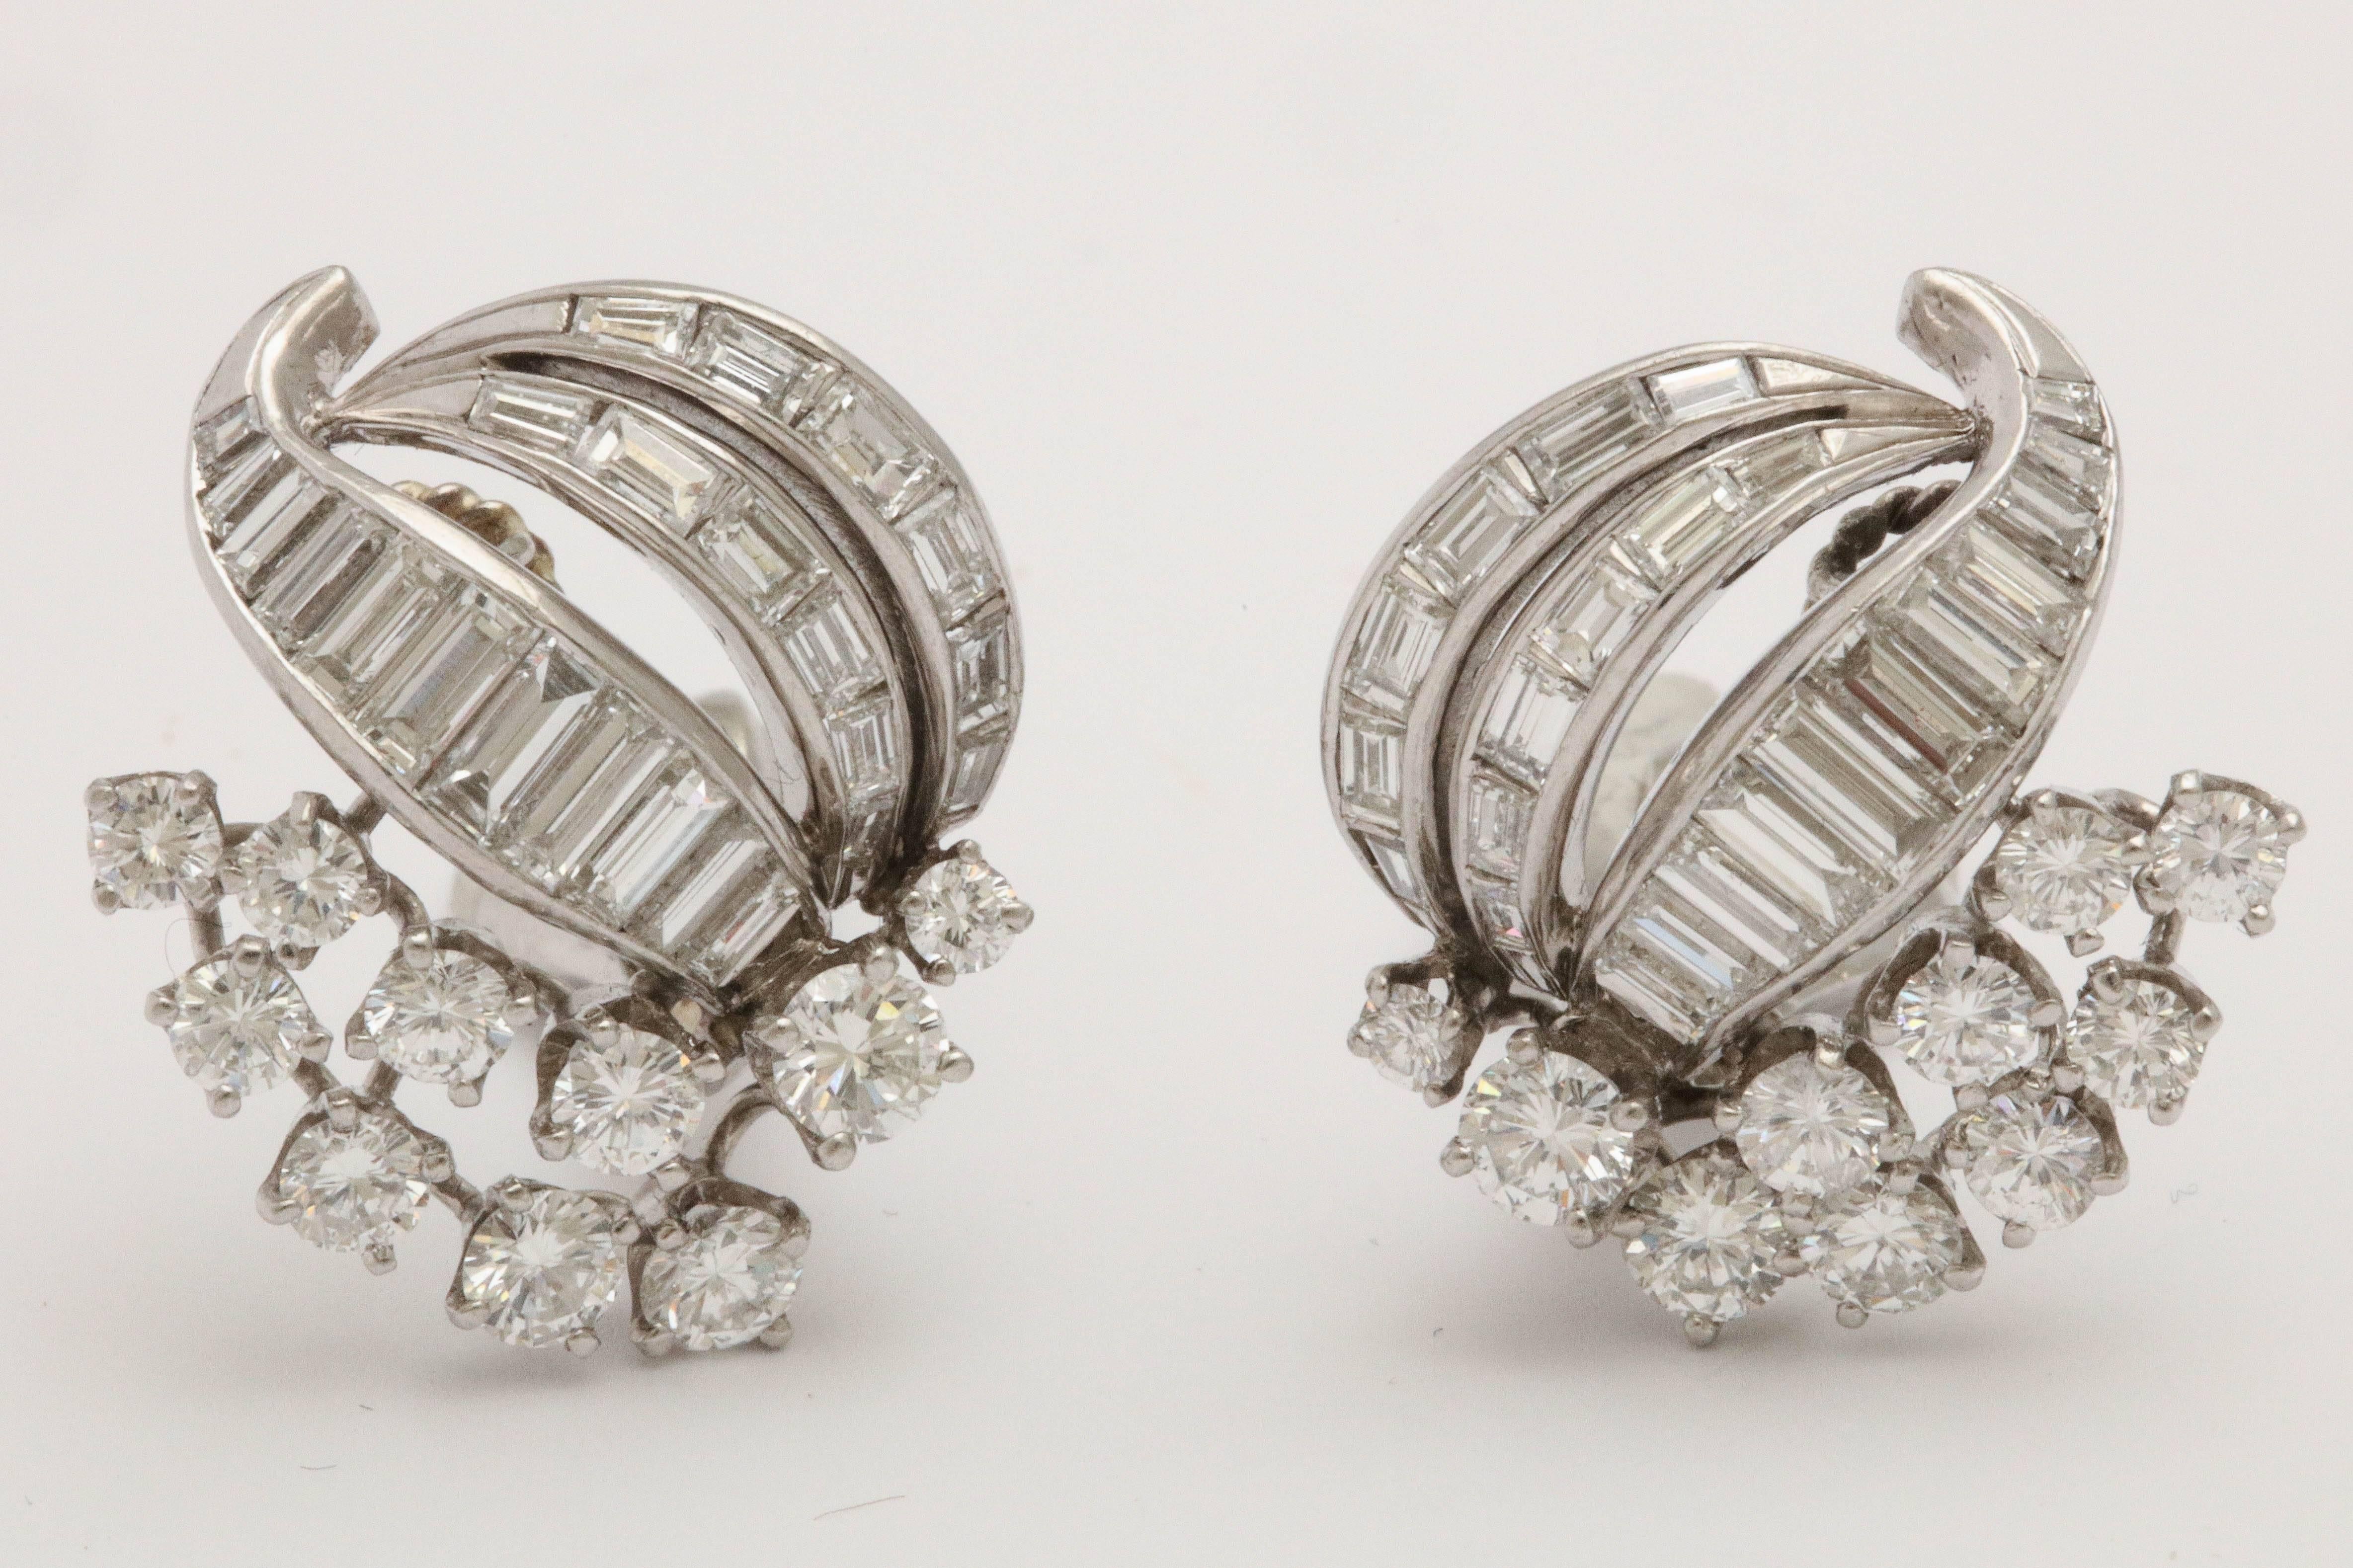 Platinum & super fine quality Diamond Earrings. Reminiscent of period  VCA and Winston style.   Ultra refined look that goes from early afternoon through cocktail & even the theater.  Very wearable.  An addition to an elegant wardrobe.
   A